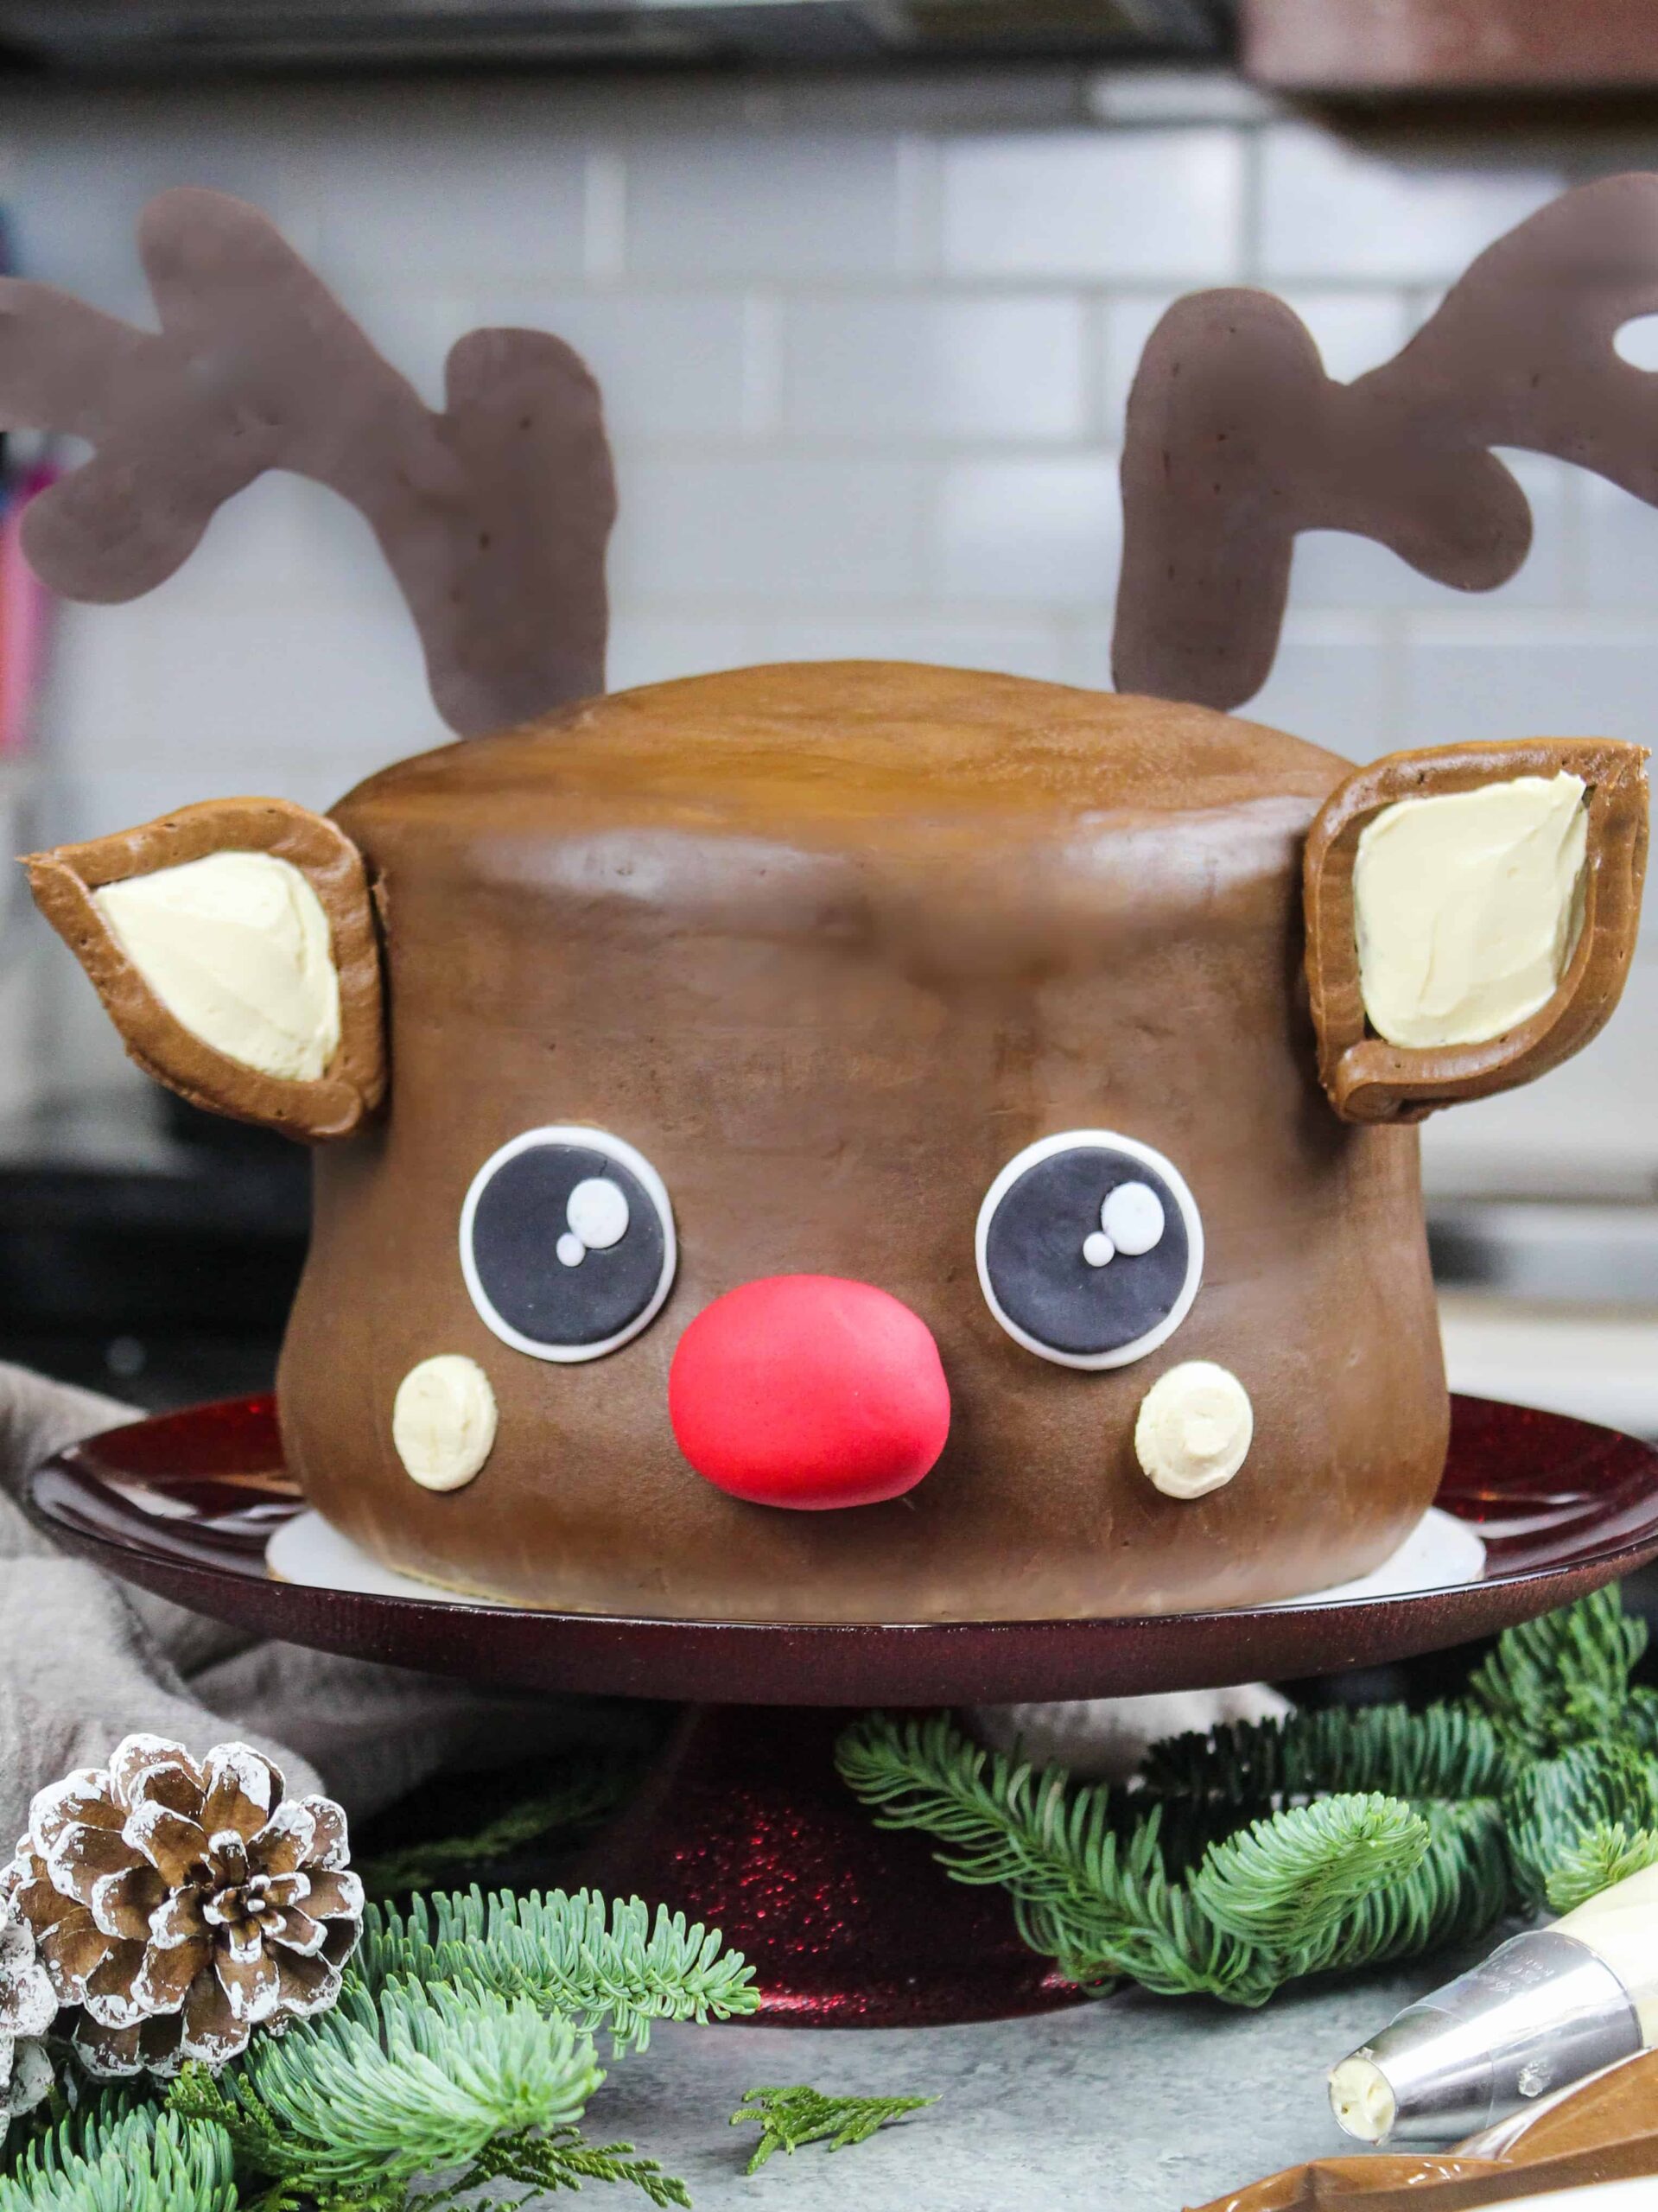 image of rudolph cake frosted with peanut butter chocolate frosting